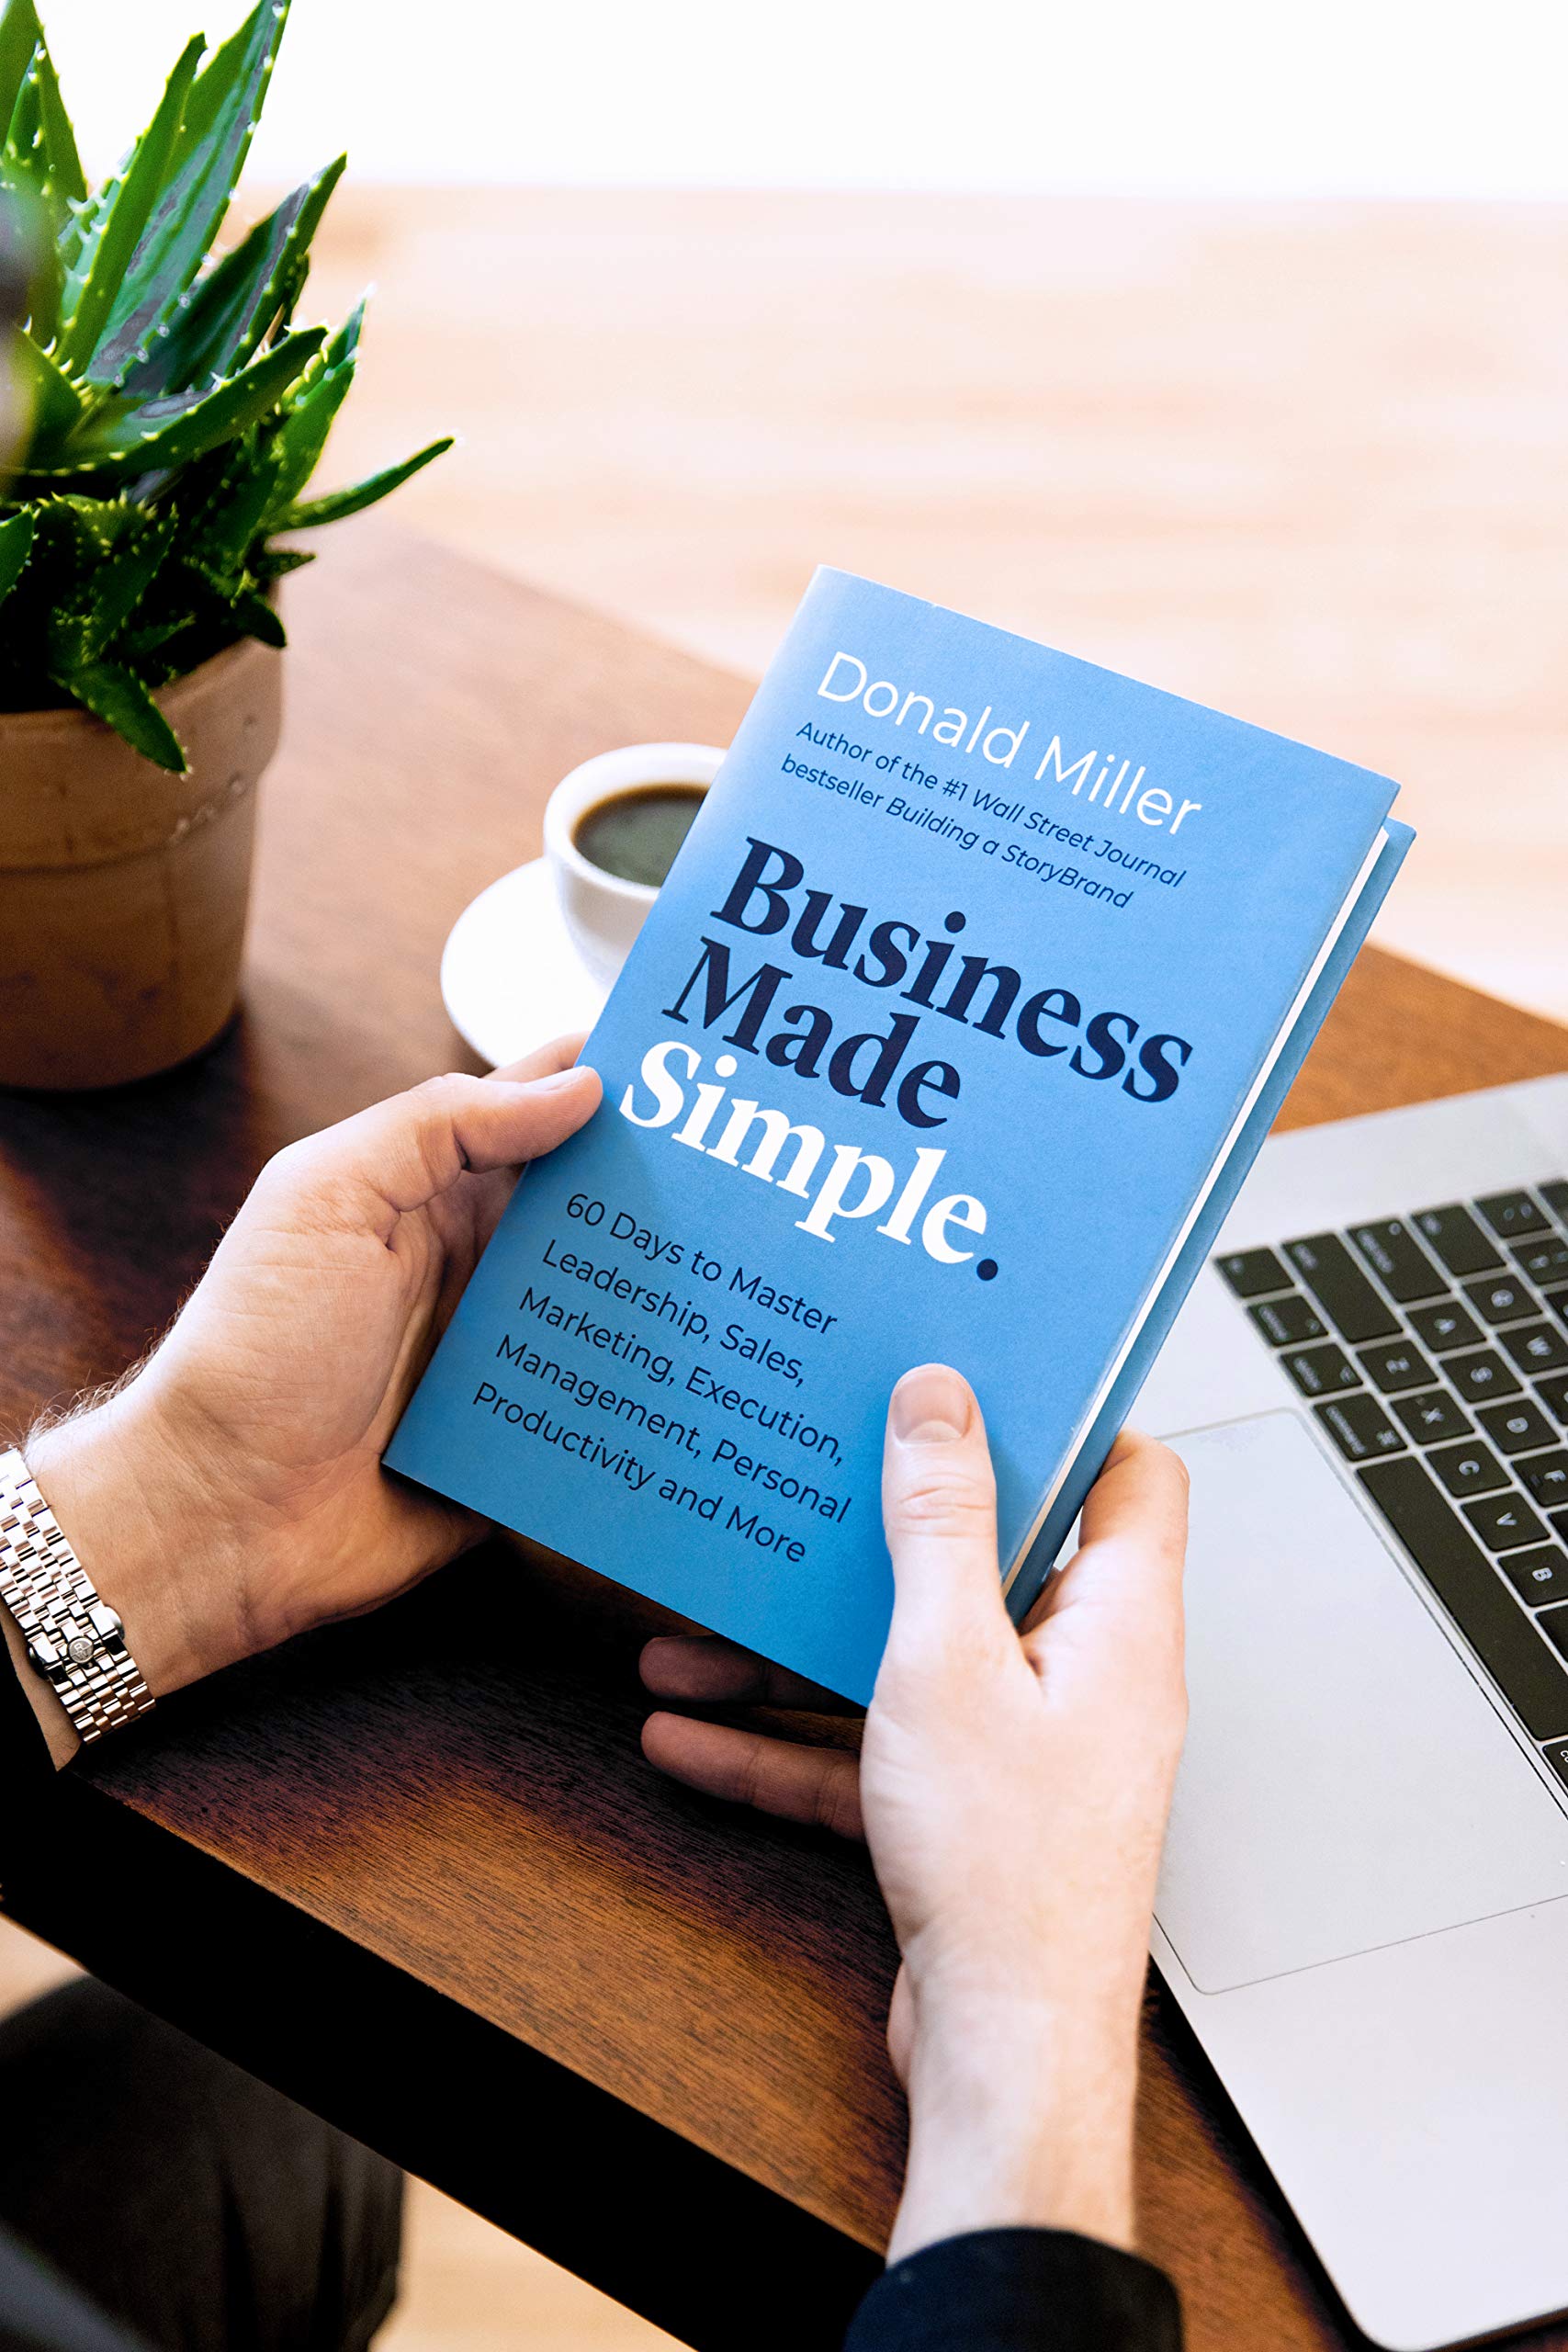 Business Made Simple: 60 Days to Master Leadership, Sales, Marketing, Execution, Management, Personal Productivity and More (Made Simple Series)